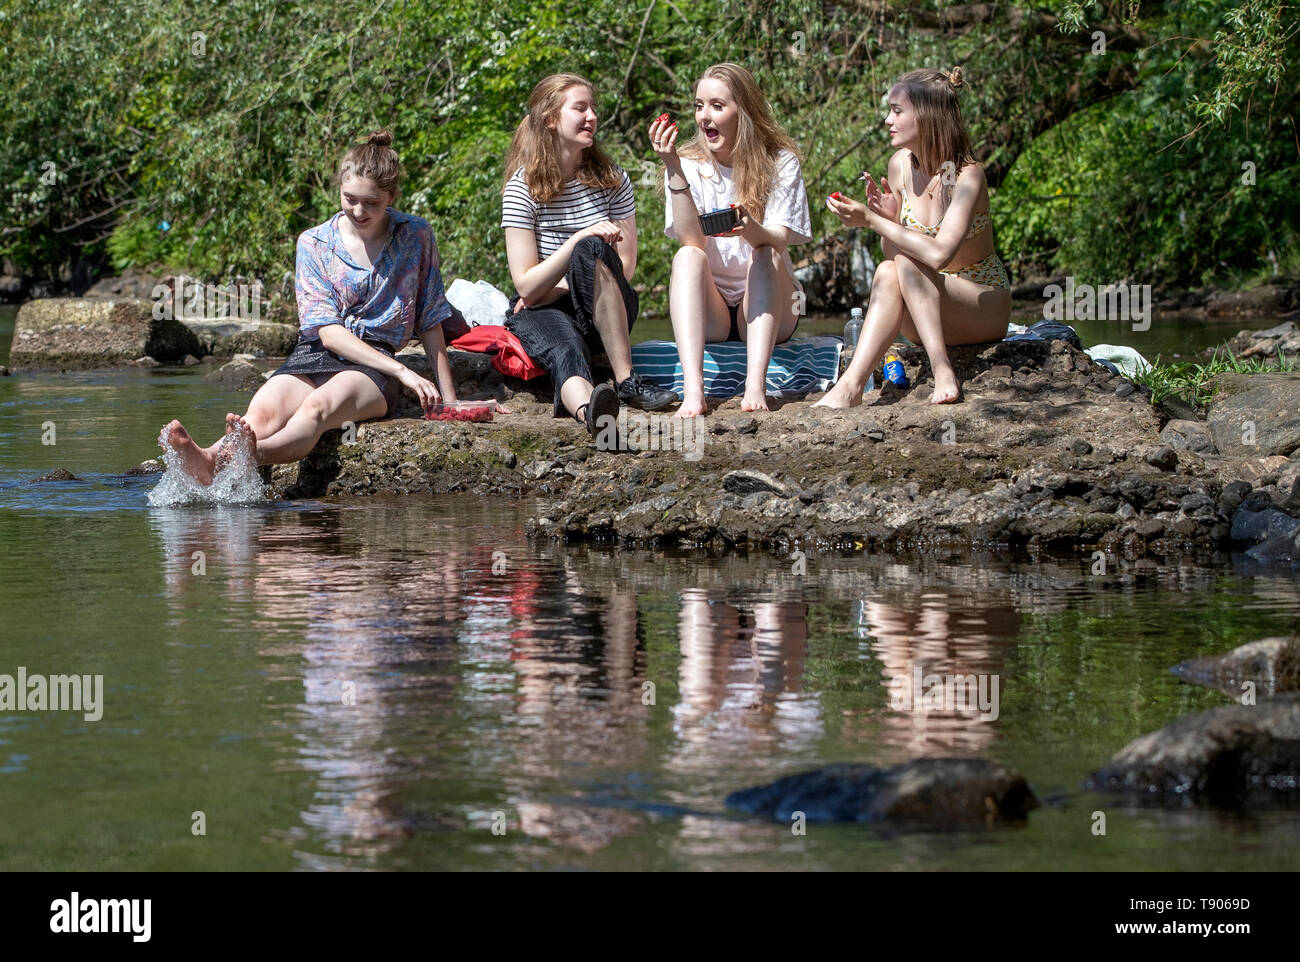 Glasgow University students (left to right) Mirren Buchanan, Lara Adams, Paula Starrs and Mia Holdsworth enjoy the sunshine alongside the River Kelvin in Glasgow as the hot weather continues. Stock Photo